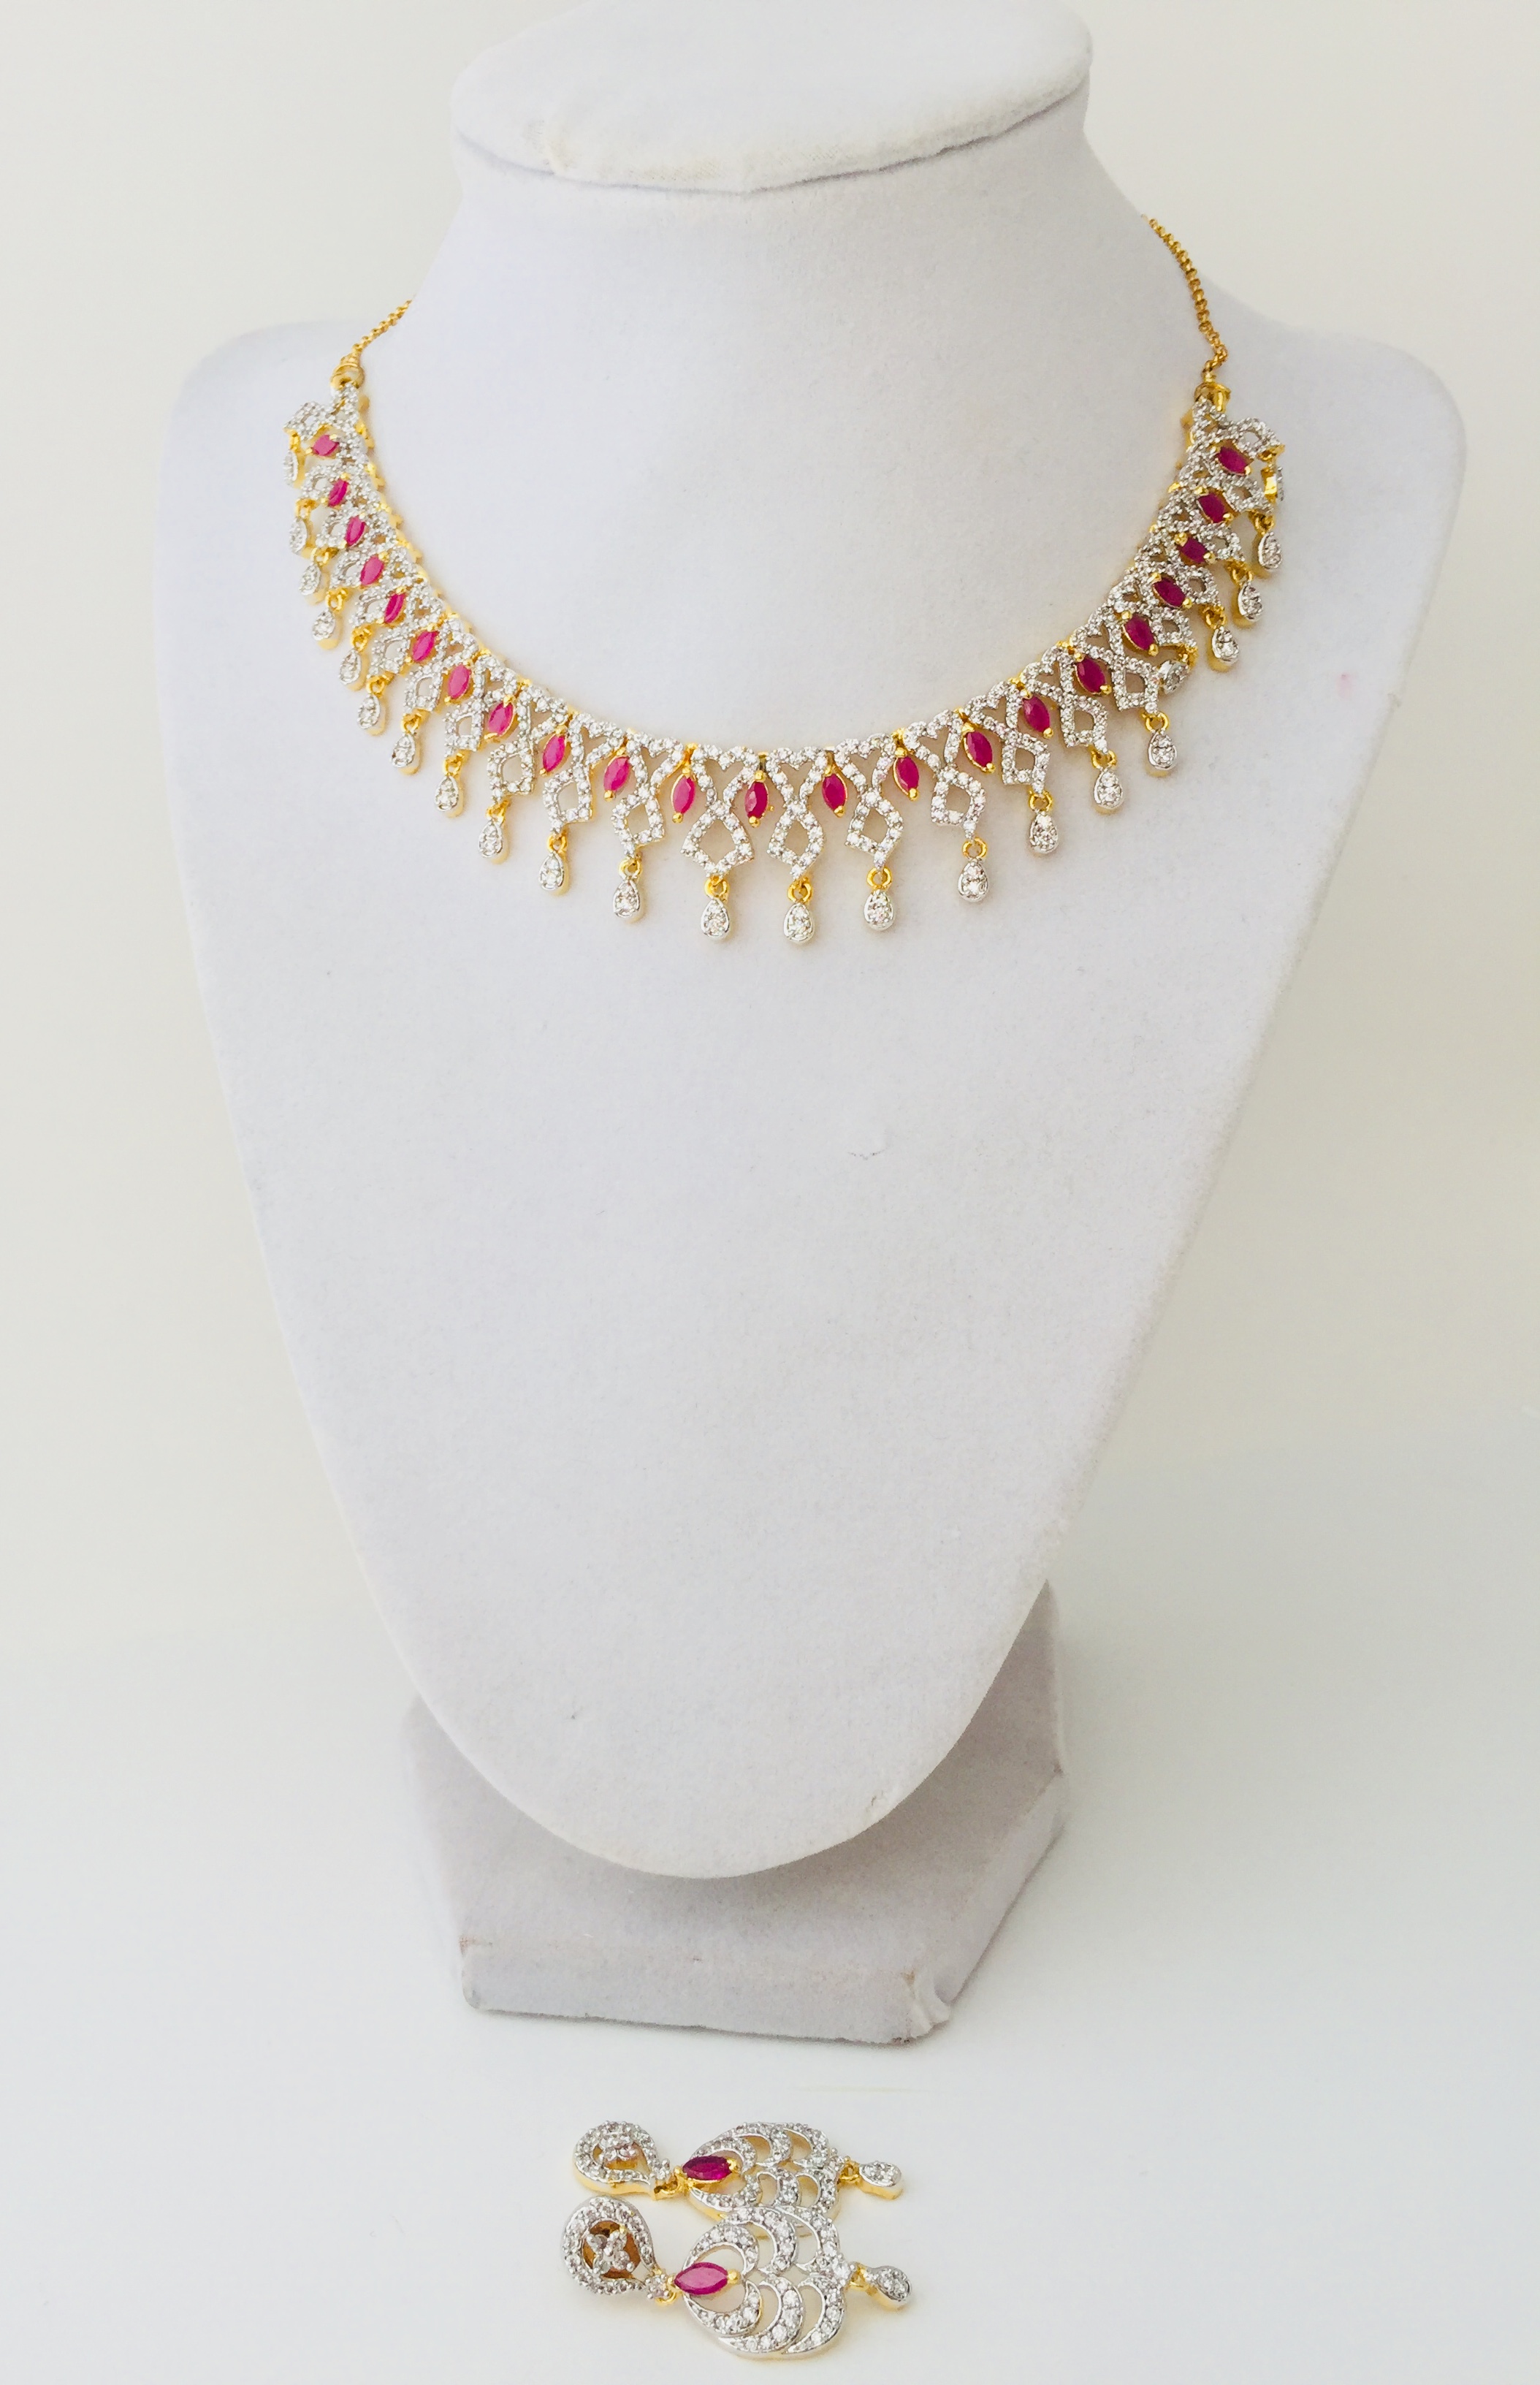 gold necklace with white stone designs